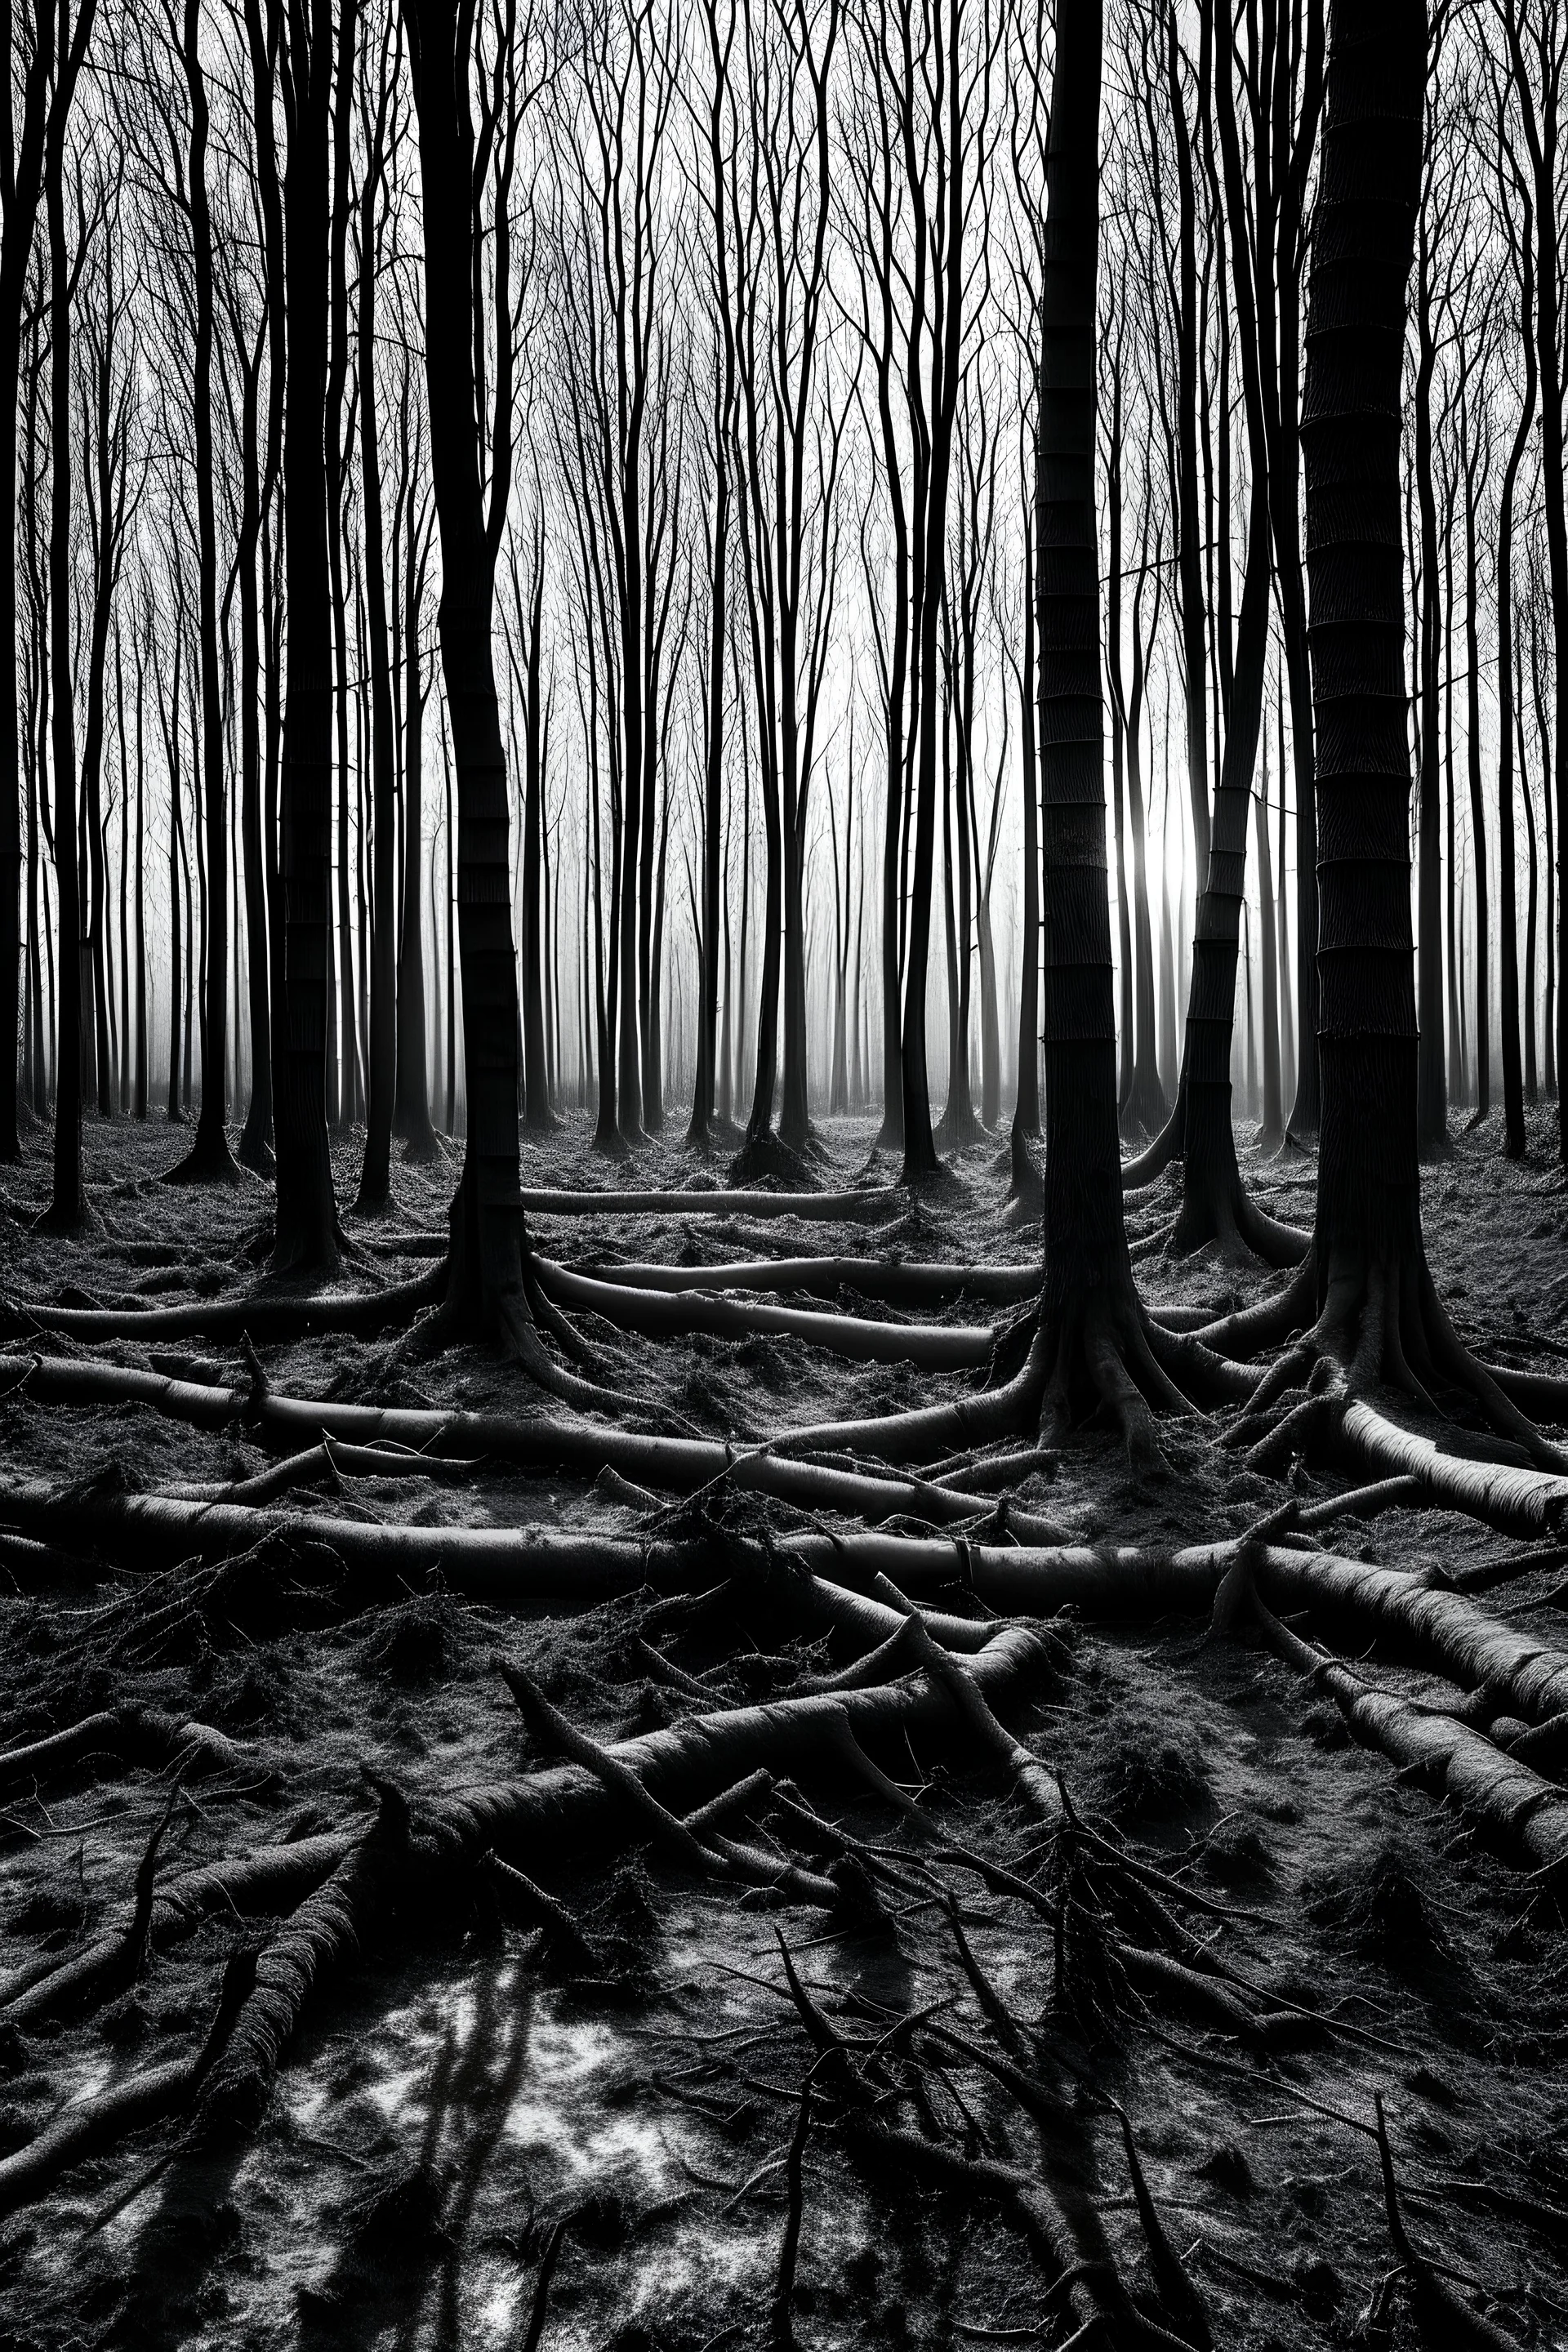 wild forest broken landcape of shattered minds with inherited wounds in black and white